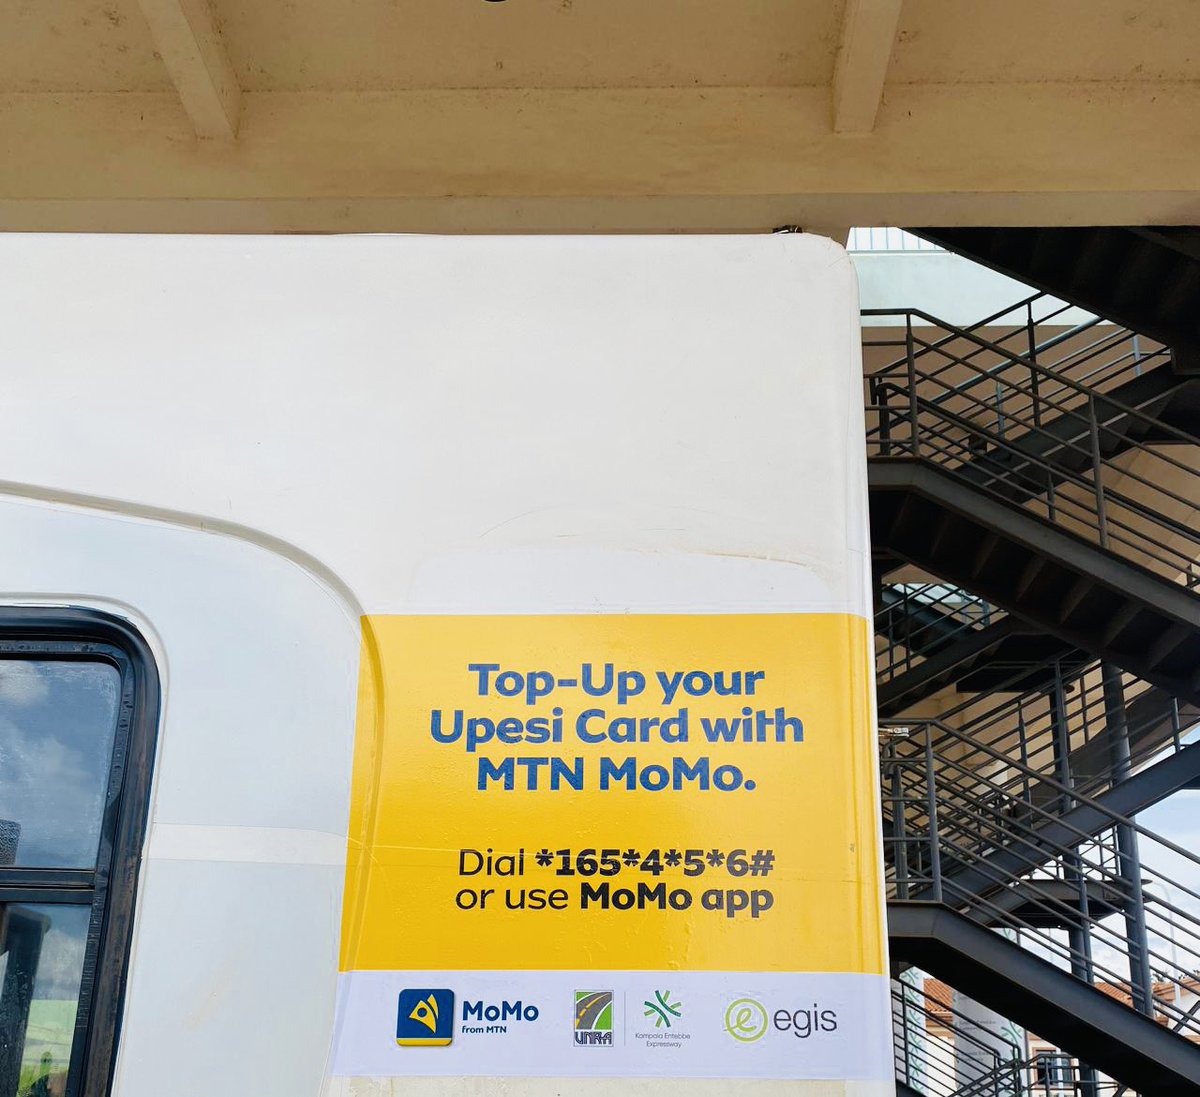 🛣️ As we kick off a new week,don’t forget to top up your Upesi cards with MTN MoMo for a hassle-free toll payments! Just dial *165*4*5*6#. Let’s drive safely and remember to make safety a priority- buckle up, stay alert and drive responsibly. #UpesiCards #Tuukabulungi.